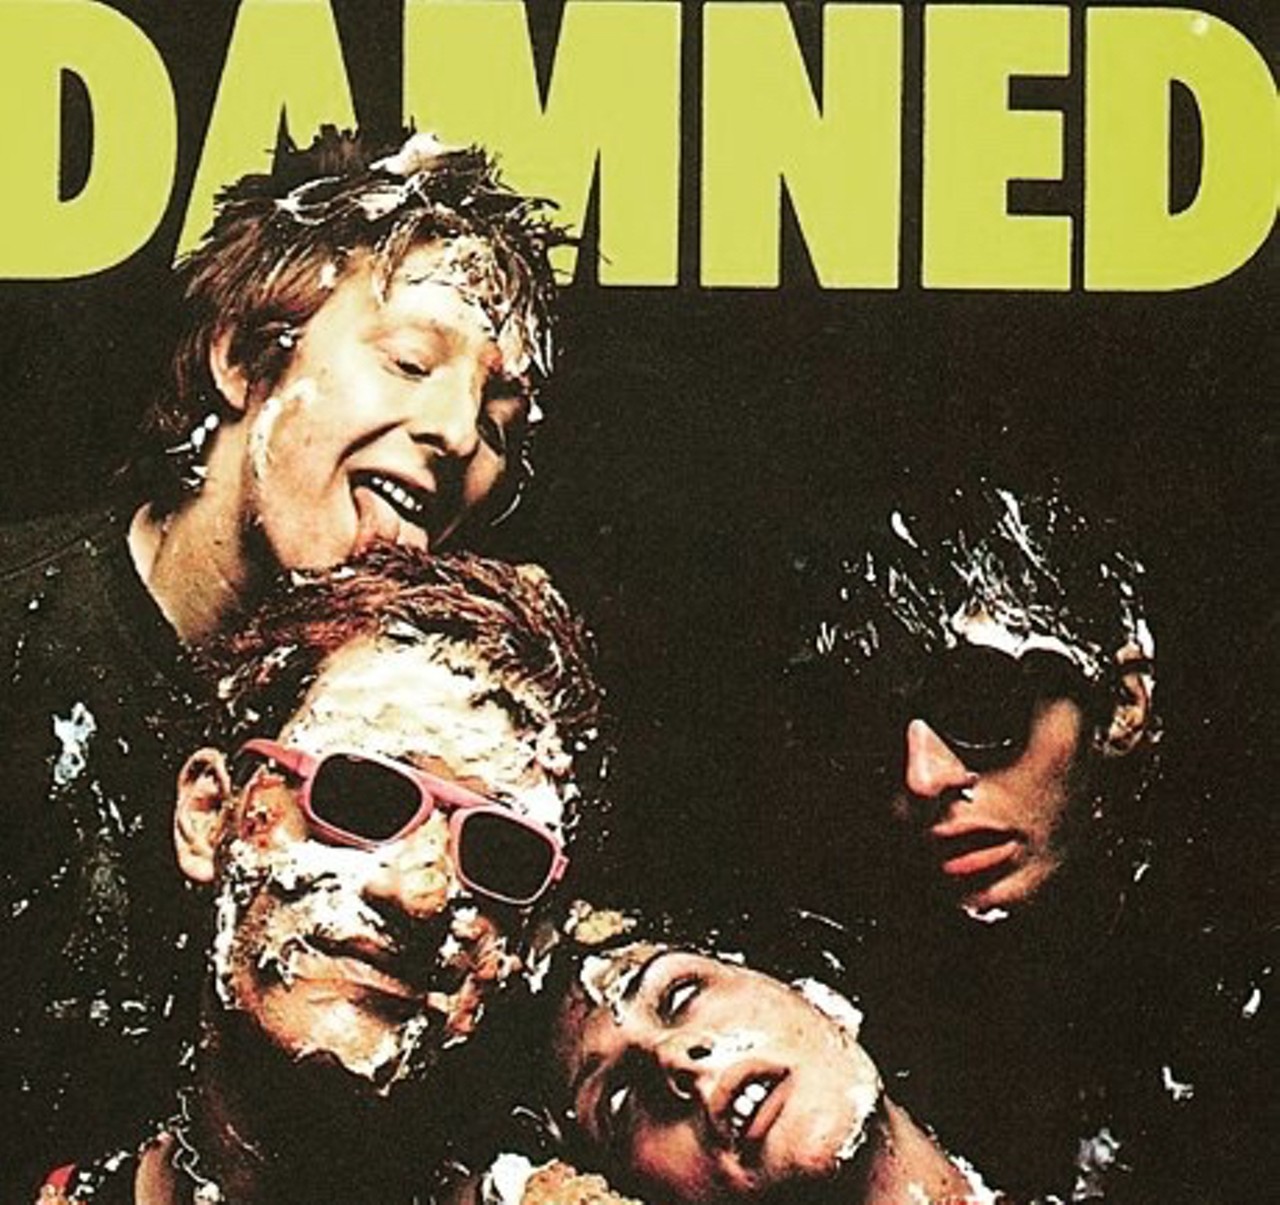 Friday, August 21: THE DAMNED: Don't You Wish That We Were Dead, Rock and Roll Hall of Fame's Foster Theater- The Damned spearheaded the punk rock movement in the UK, but the group is often criminally forgotten when one thinks of quintessential punk bands. Also known as &#147;the first UK punks on wax,&#148; the band famously played its first show ever opening for the Sex Pistols at London&#146;s 100 Club. That show was later released as a live album. Known for its outrageous on and off stage behavior, the group somehow managed to get kicked off of a tour with the Sex Pistols, an accolade that really speaks for itself. THE DAMNED: Don&#146;t You Wish That We Were Dead, a documentary from director Wes Orshoski (Lemmy), features commentary from artists who were influenced by the band, including members of Blondie, the Clash, Buzzcocks, and more. The film screens at 7 tonight in the Museum&#146;s Foster Theater. Following the screening, Orshoski will participate in a question and answer session with the audience. The event is free with a reservation through the Rock Hall website or at the Rock Hall box office. (Mann, Photo courtesy of Instagram user @kulbritania.)